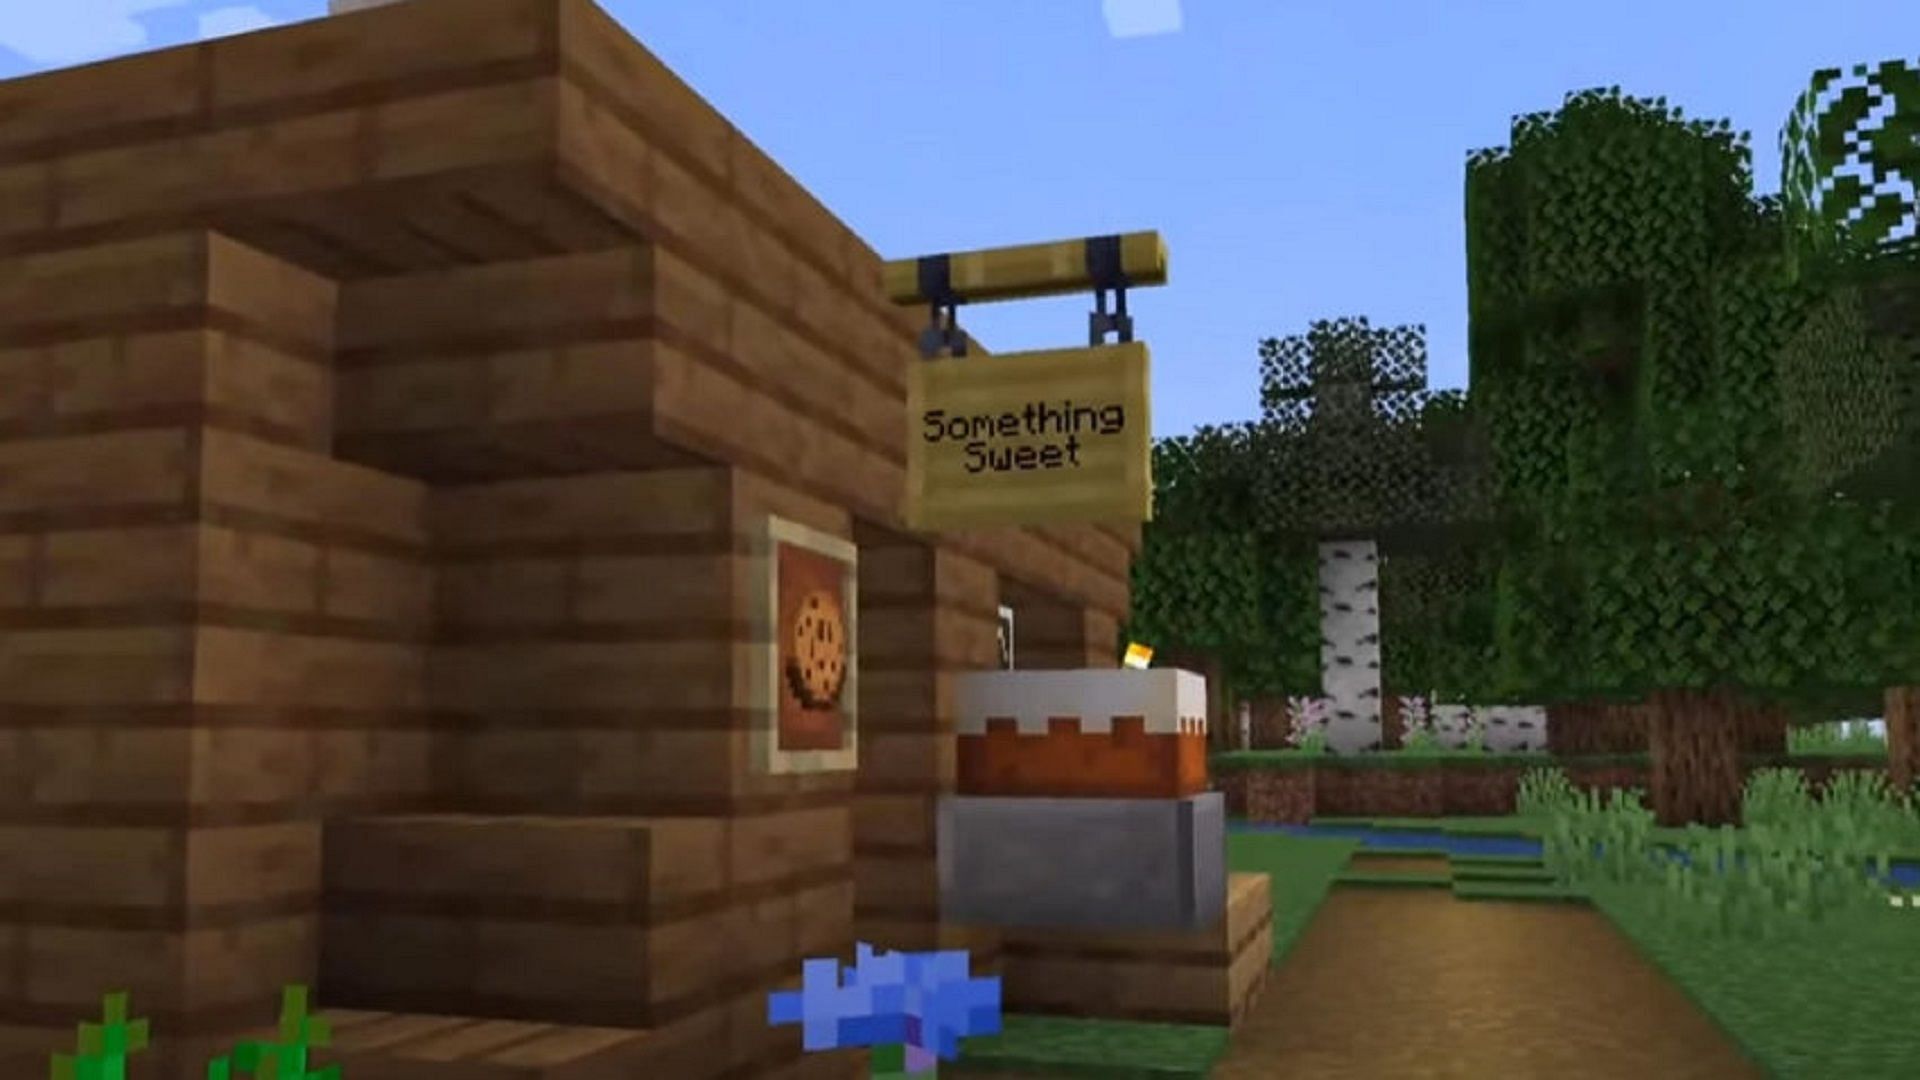 A hanging sign being displayed in Minecraft